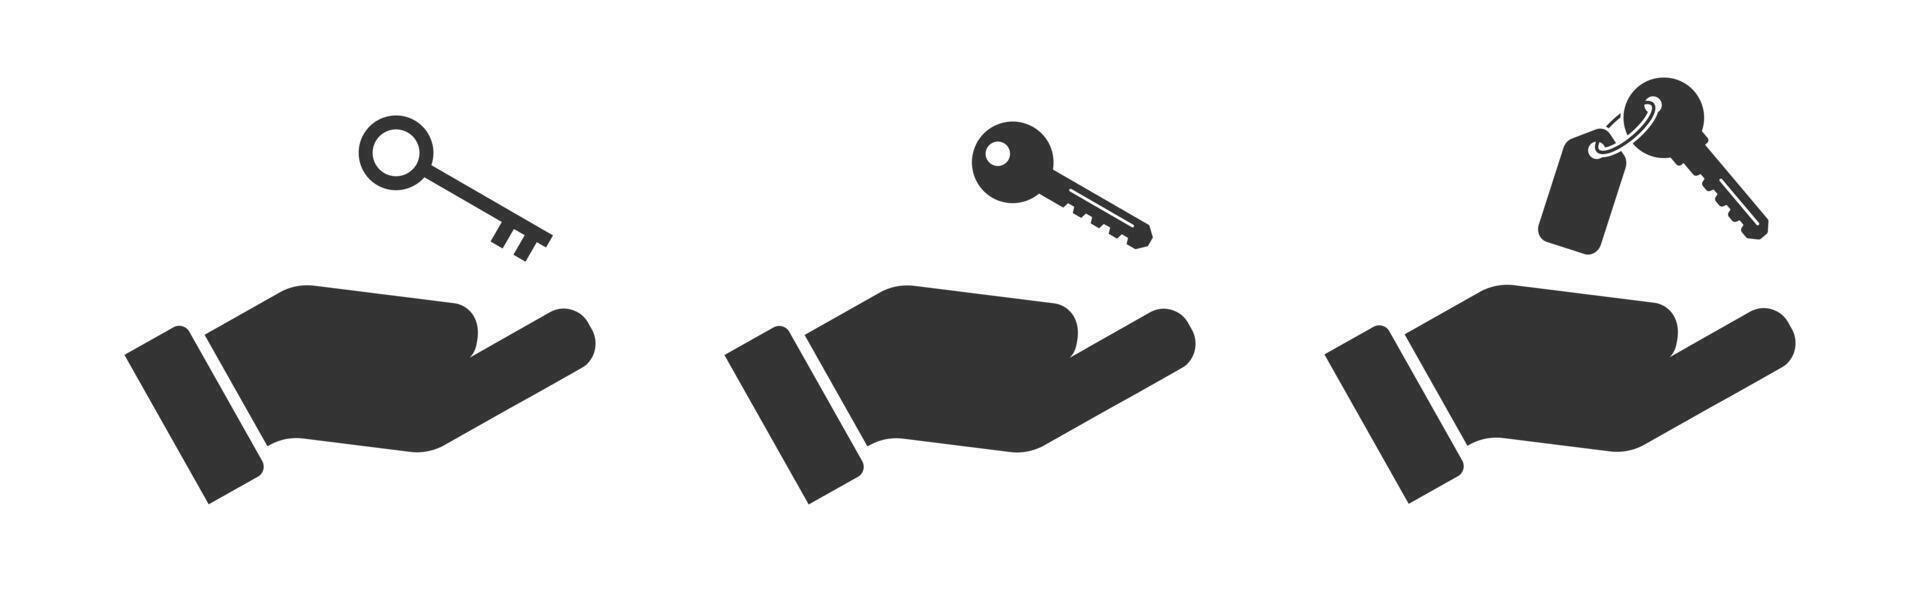 Hand with a key icon. Hand holds home keys. Flat vector illustration.